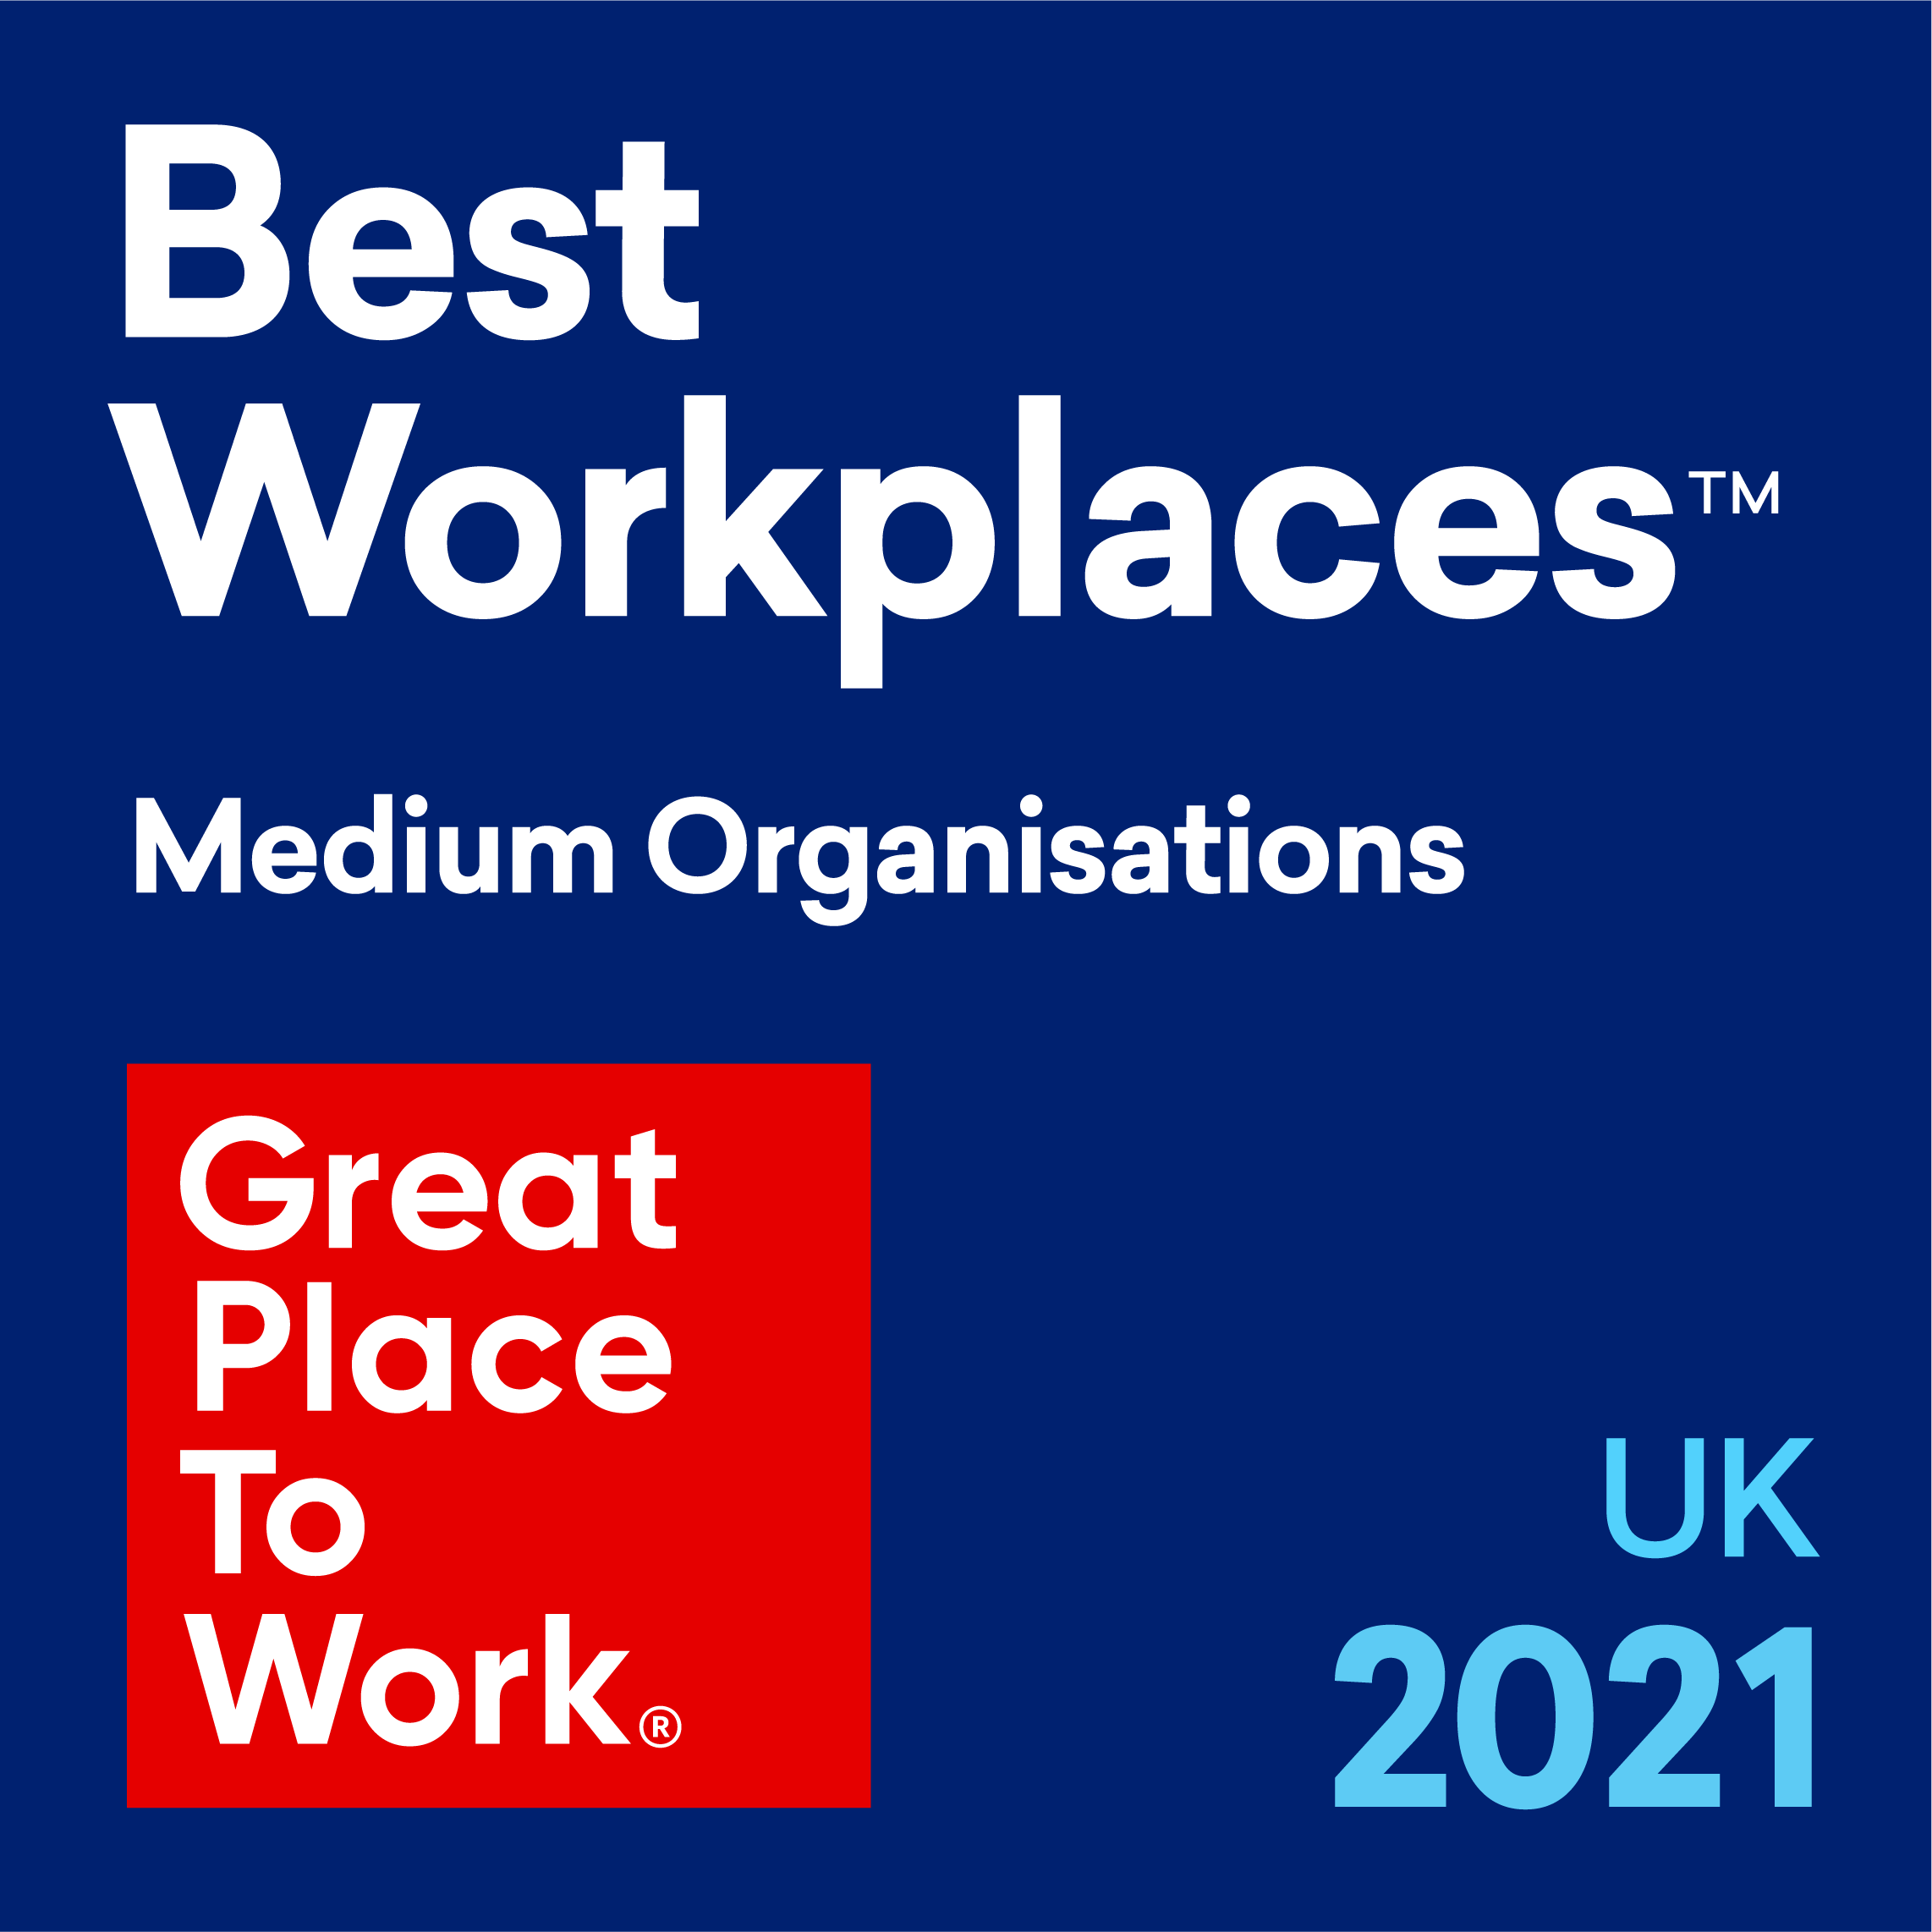 Best Workplaces for Medium Organisations in the UK